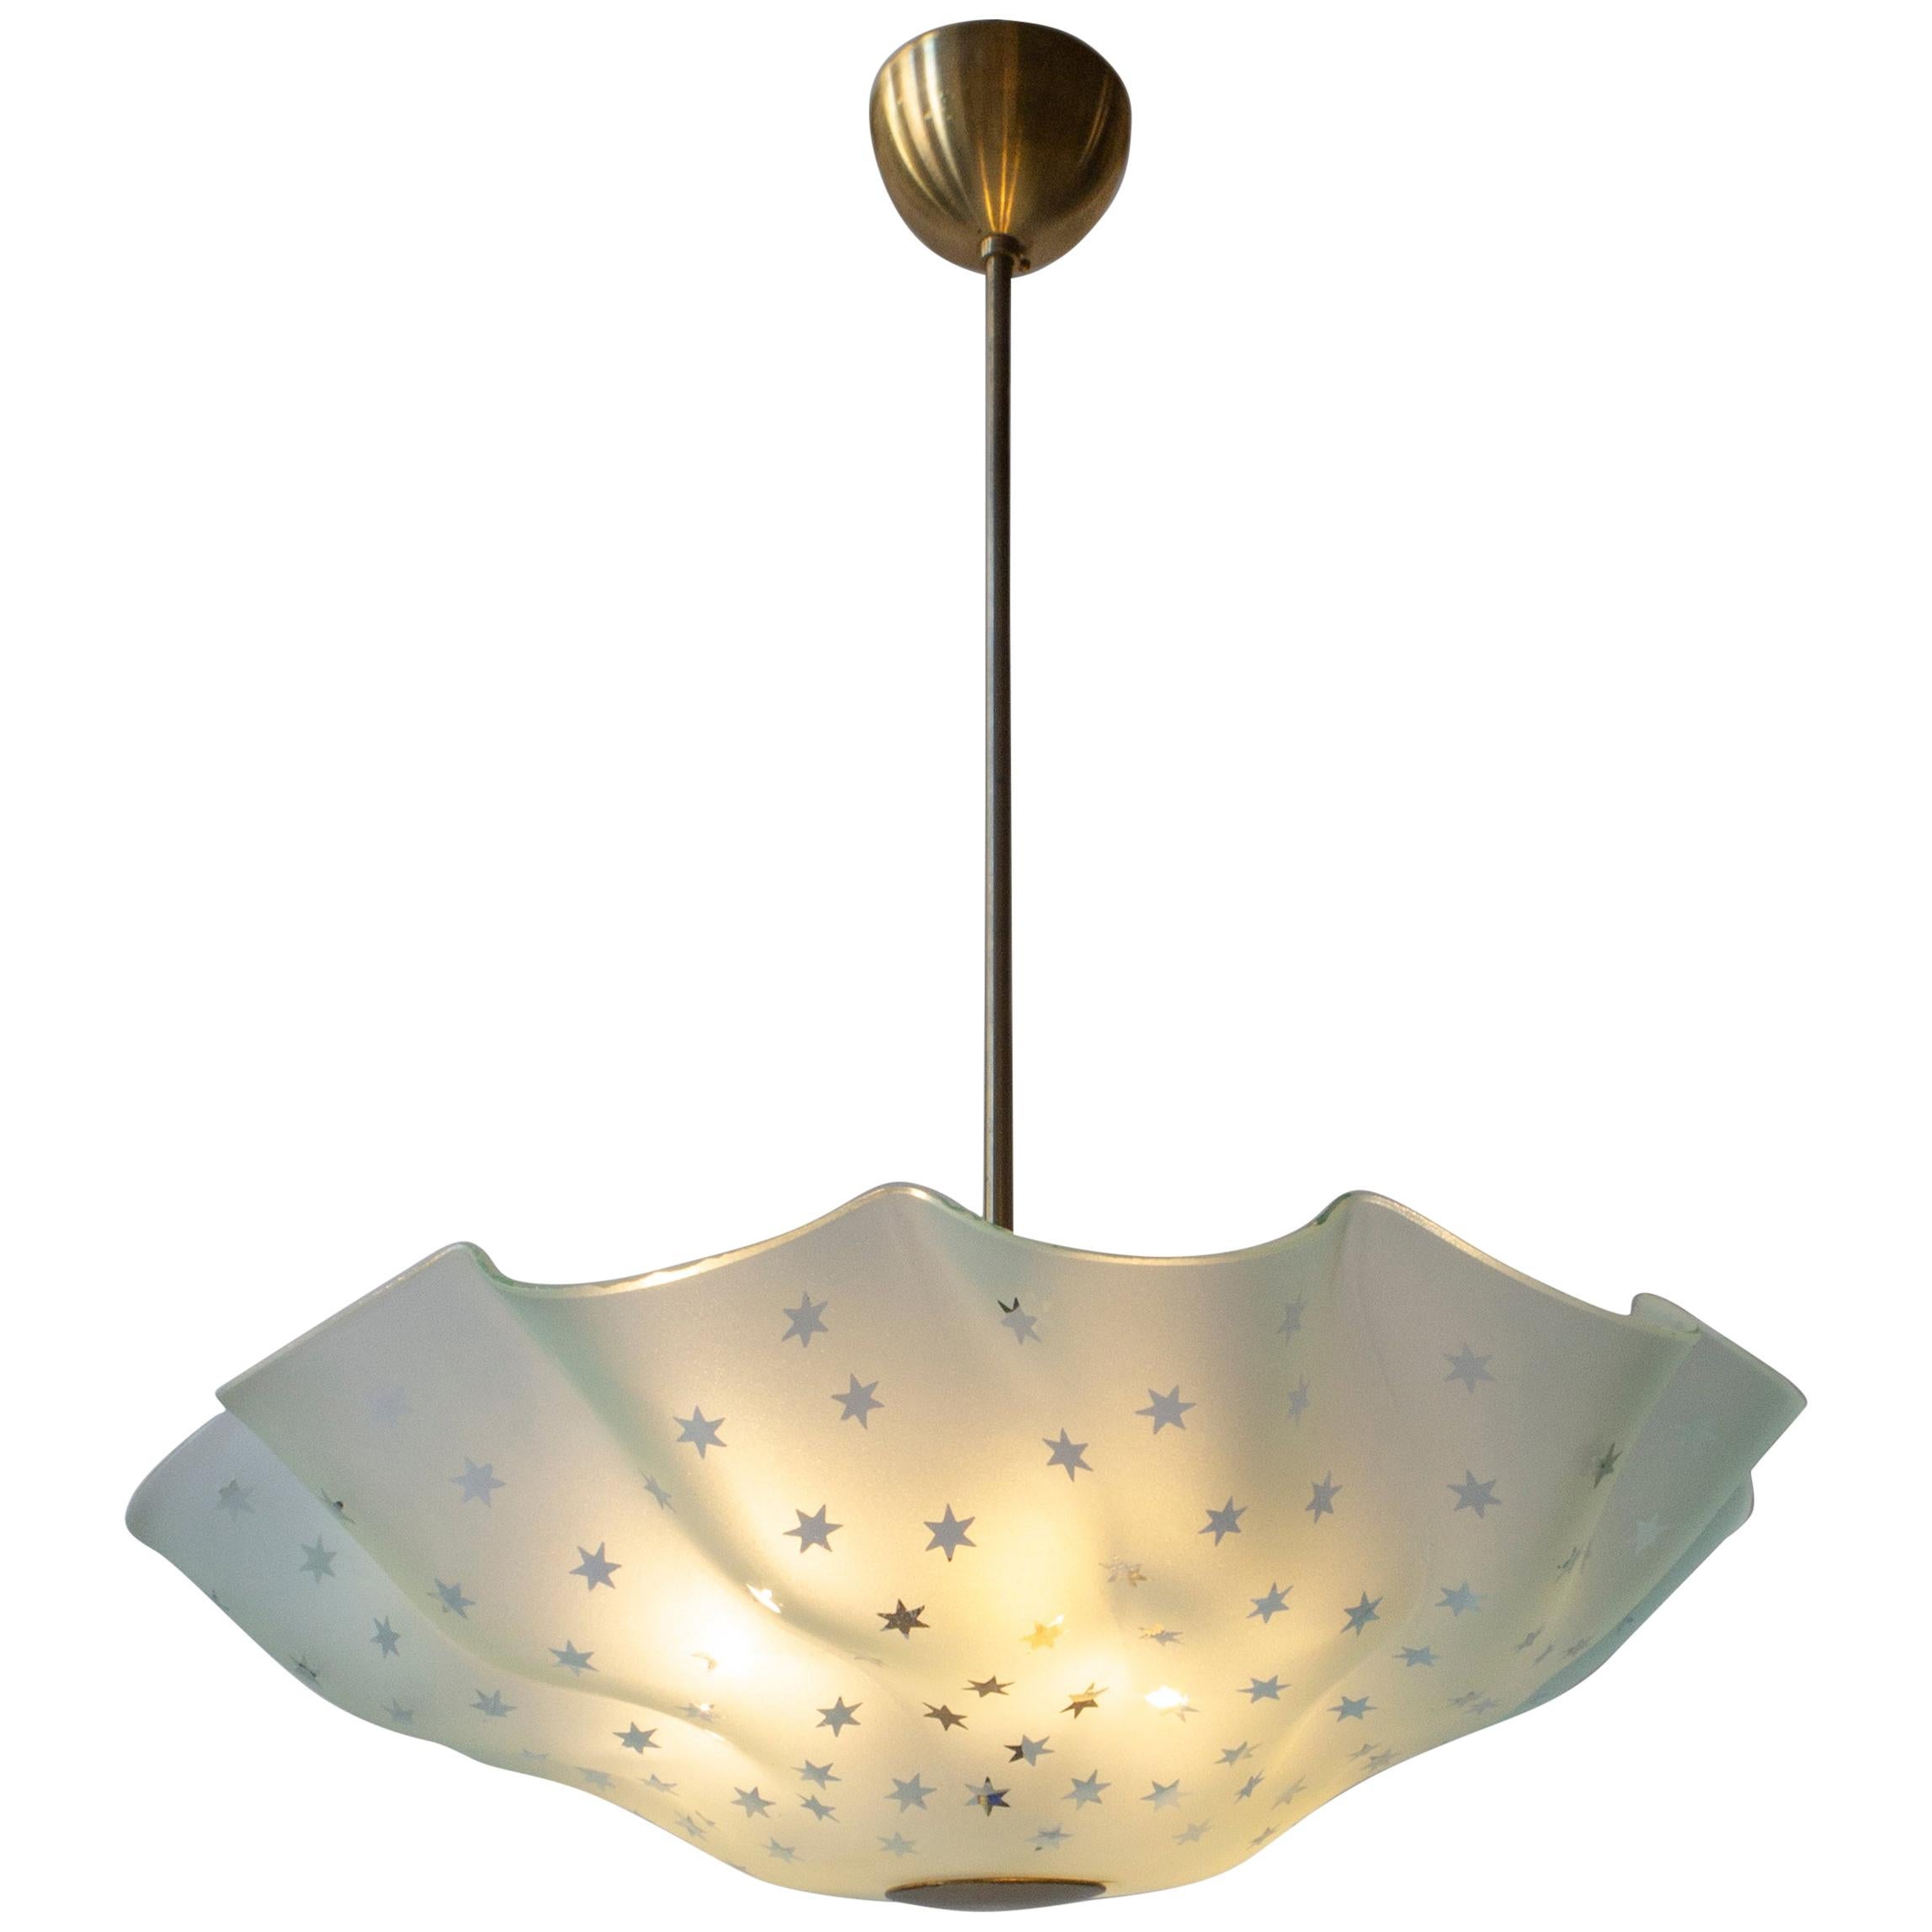 Orrefors Attributed, Rare Swedish Frosted Glass & Brass Handkerchief Chandelier